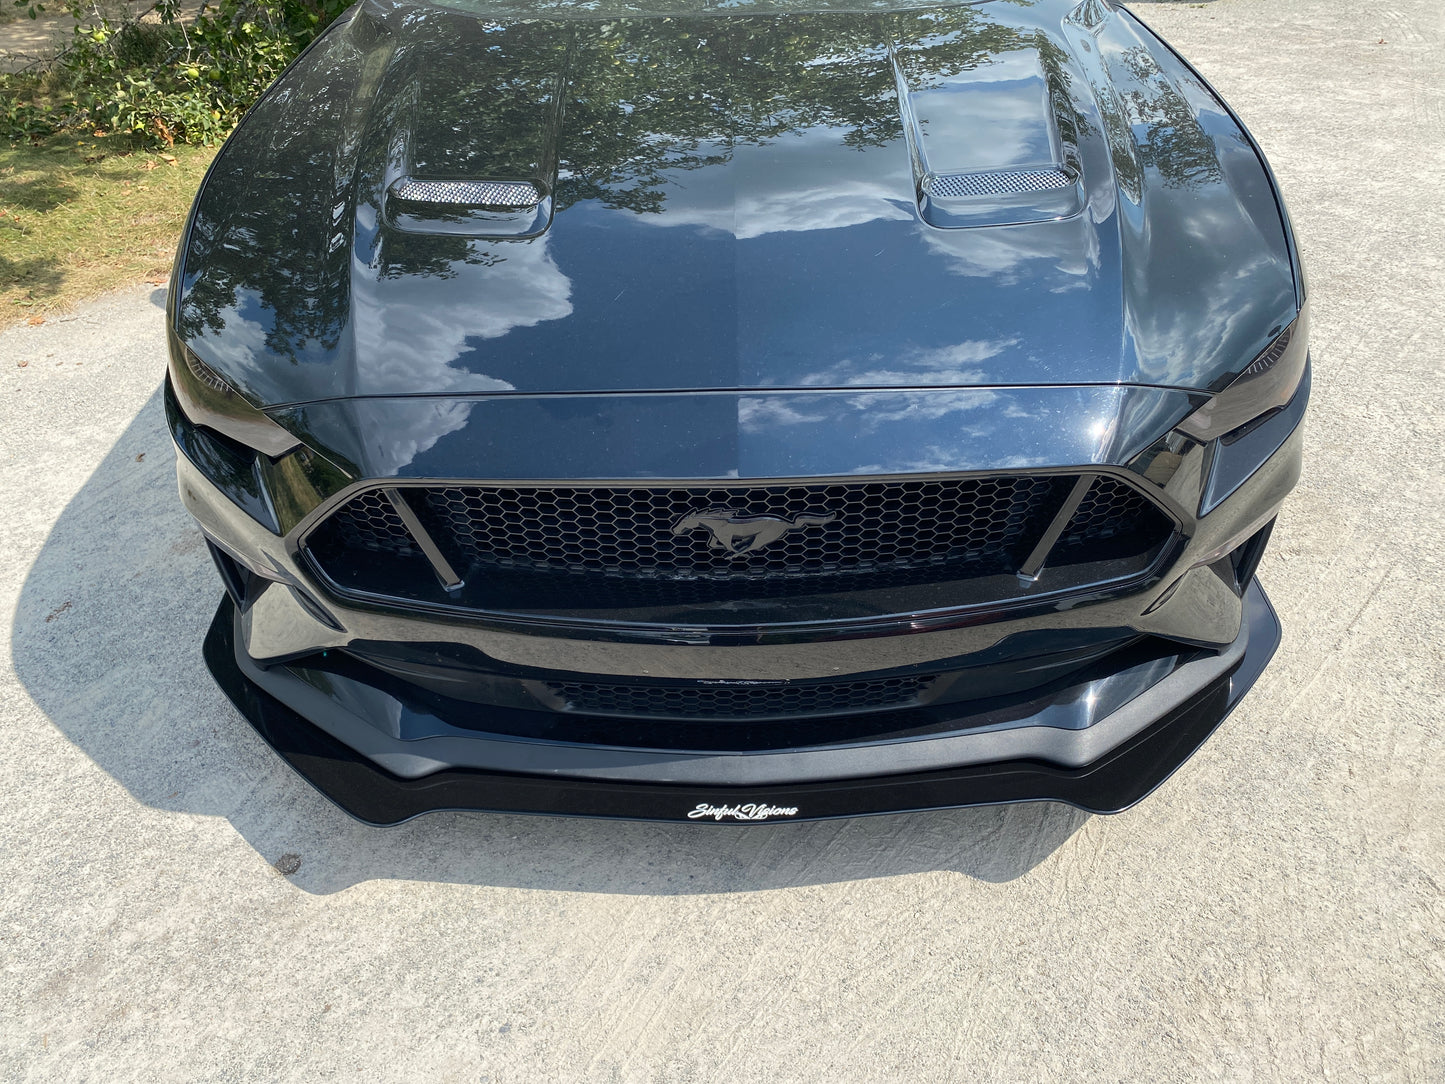 2019 Ford Mustang GT Stage 2 Kit